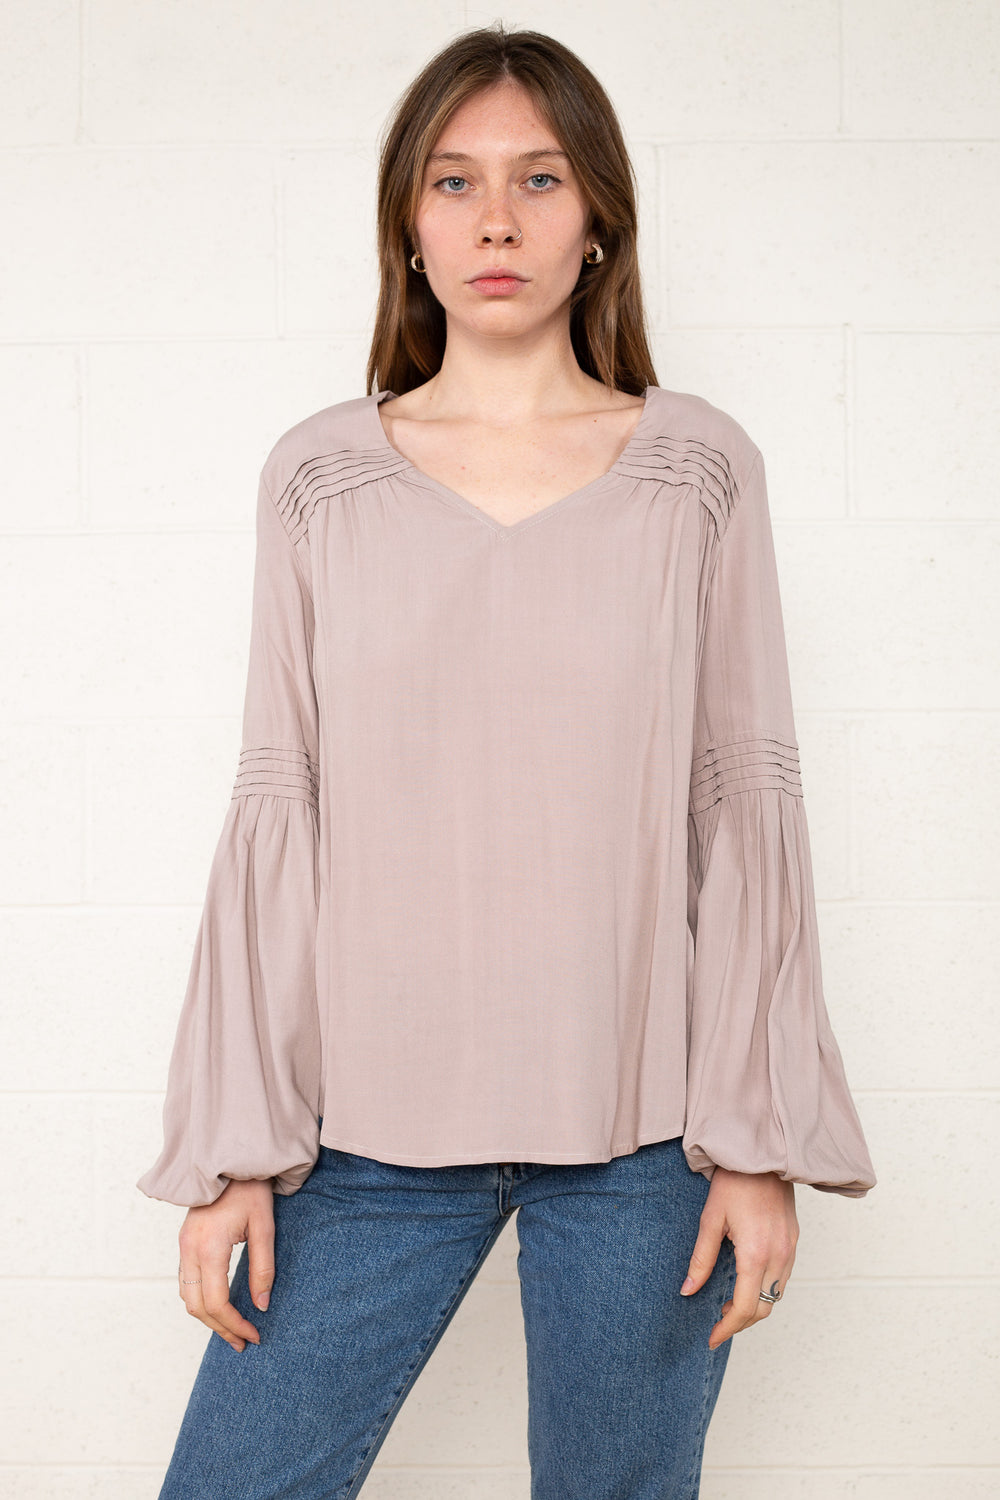 Ariella Pintuck Flare Sleeve Top by NLT: Chic long sleeve blouse with intricate pin-tucking and trendy flare sleeves. Versatile style for day-to-night transitions, blending sophistication and comfort seamlessly.